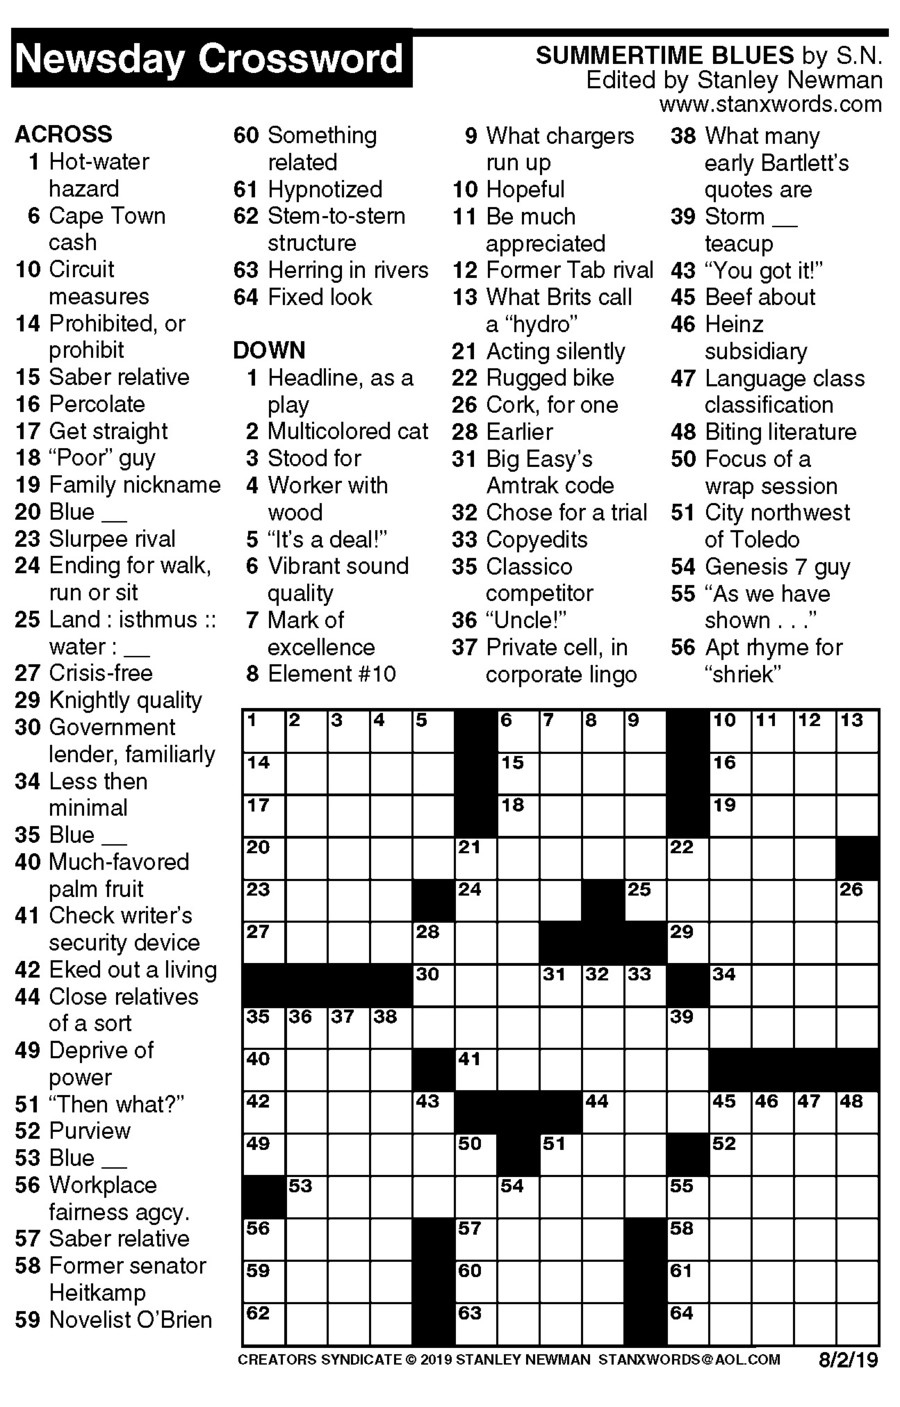 Newsday Crossword Puzzle For Aug 02 2019 By Stanley Newman Creators 